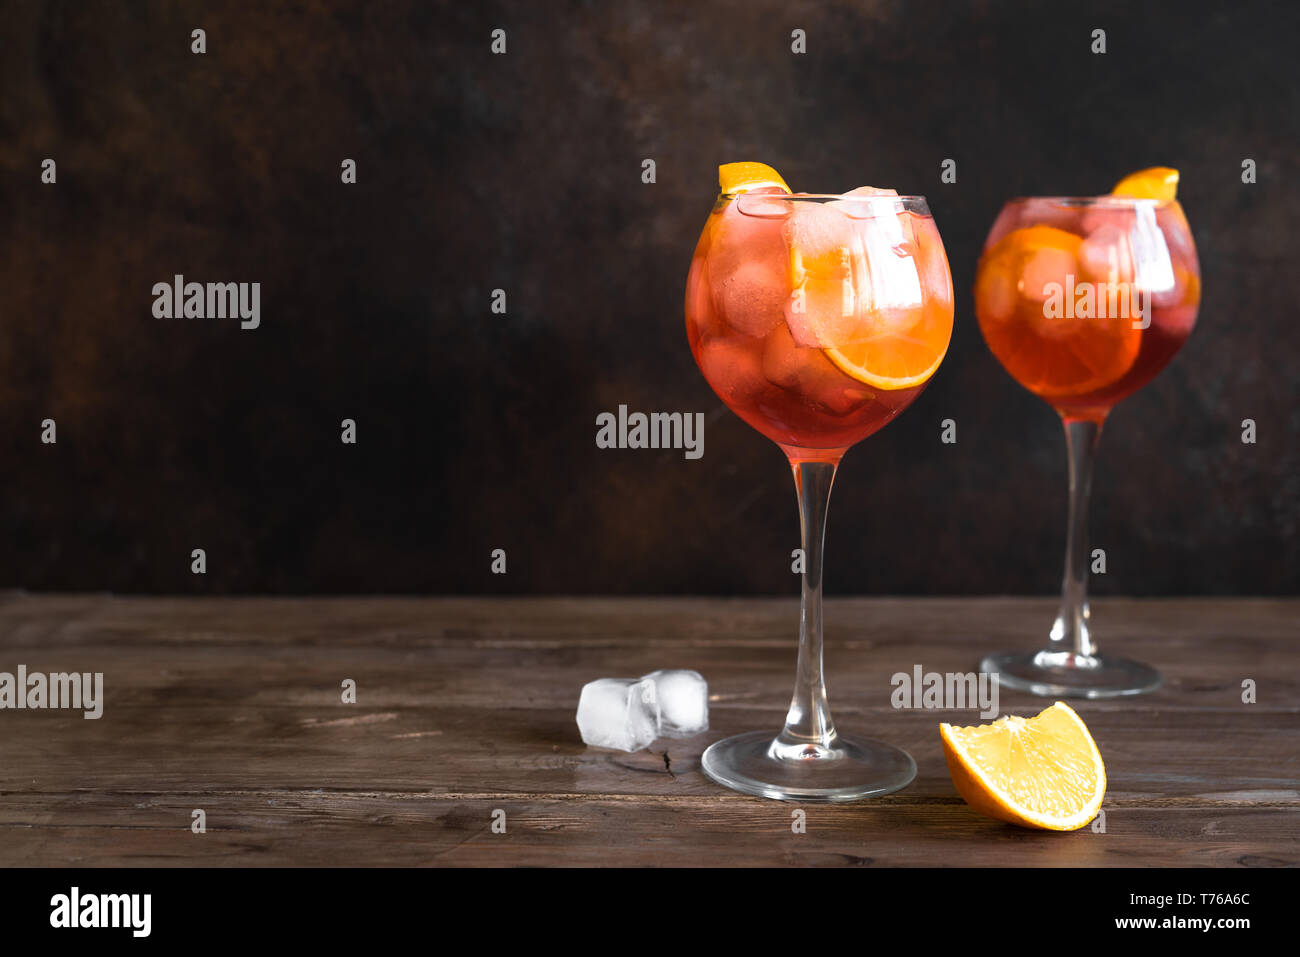 Aperol Spritz Cocktail in glasses on wooden table, copy space. Homemade cocktail with orange and ice. Stock Photo